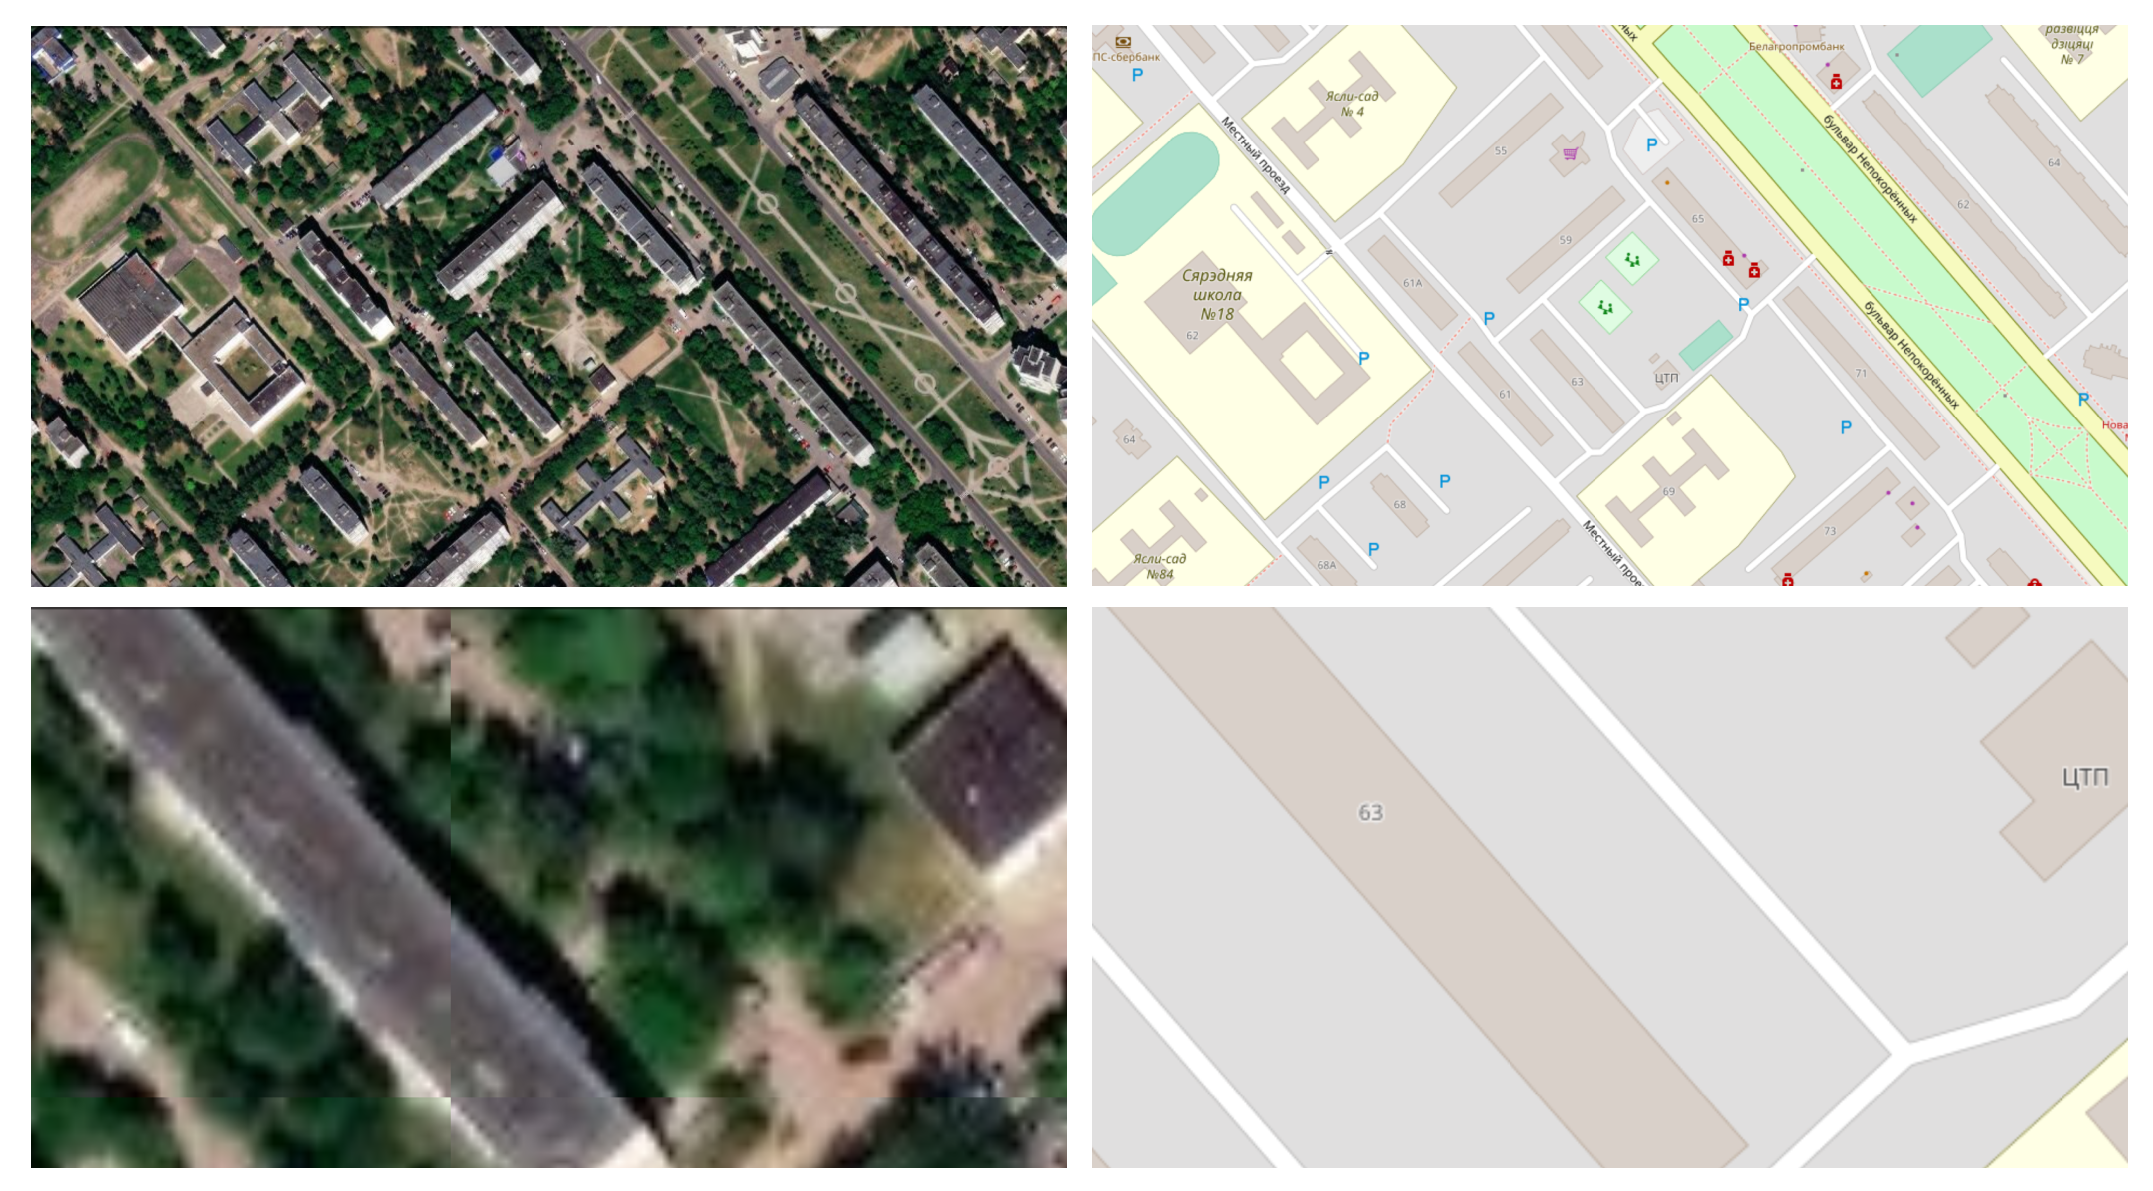 Raster map data from Esri World Imagery (on the left), and vector map data from OpenStreetMap (on the right), both showing Ilya’s childhood neighborhood in Mogilev, Belarus. Zooming into raster map data makes it fuzzier, while vector map data retains its sharpness.